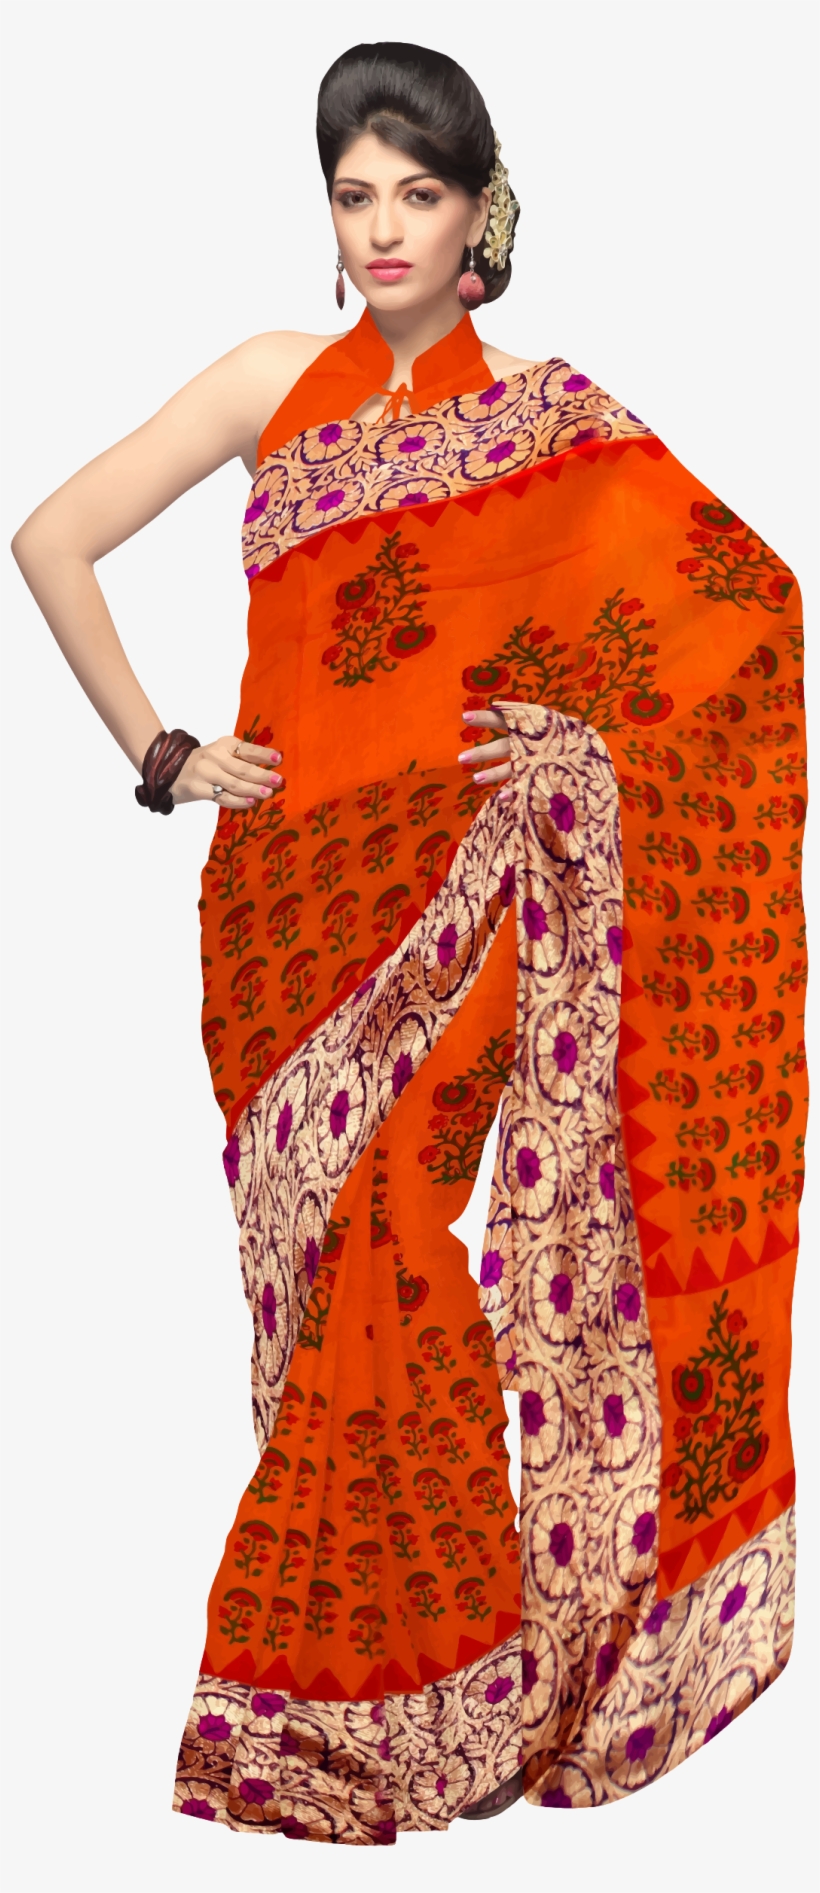 This Free Icons Png Design Of Woman In Saree 2, transparent png #2447589